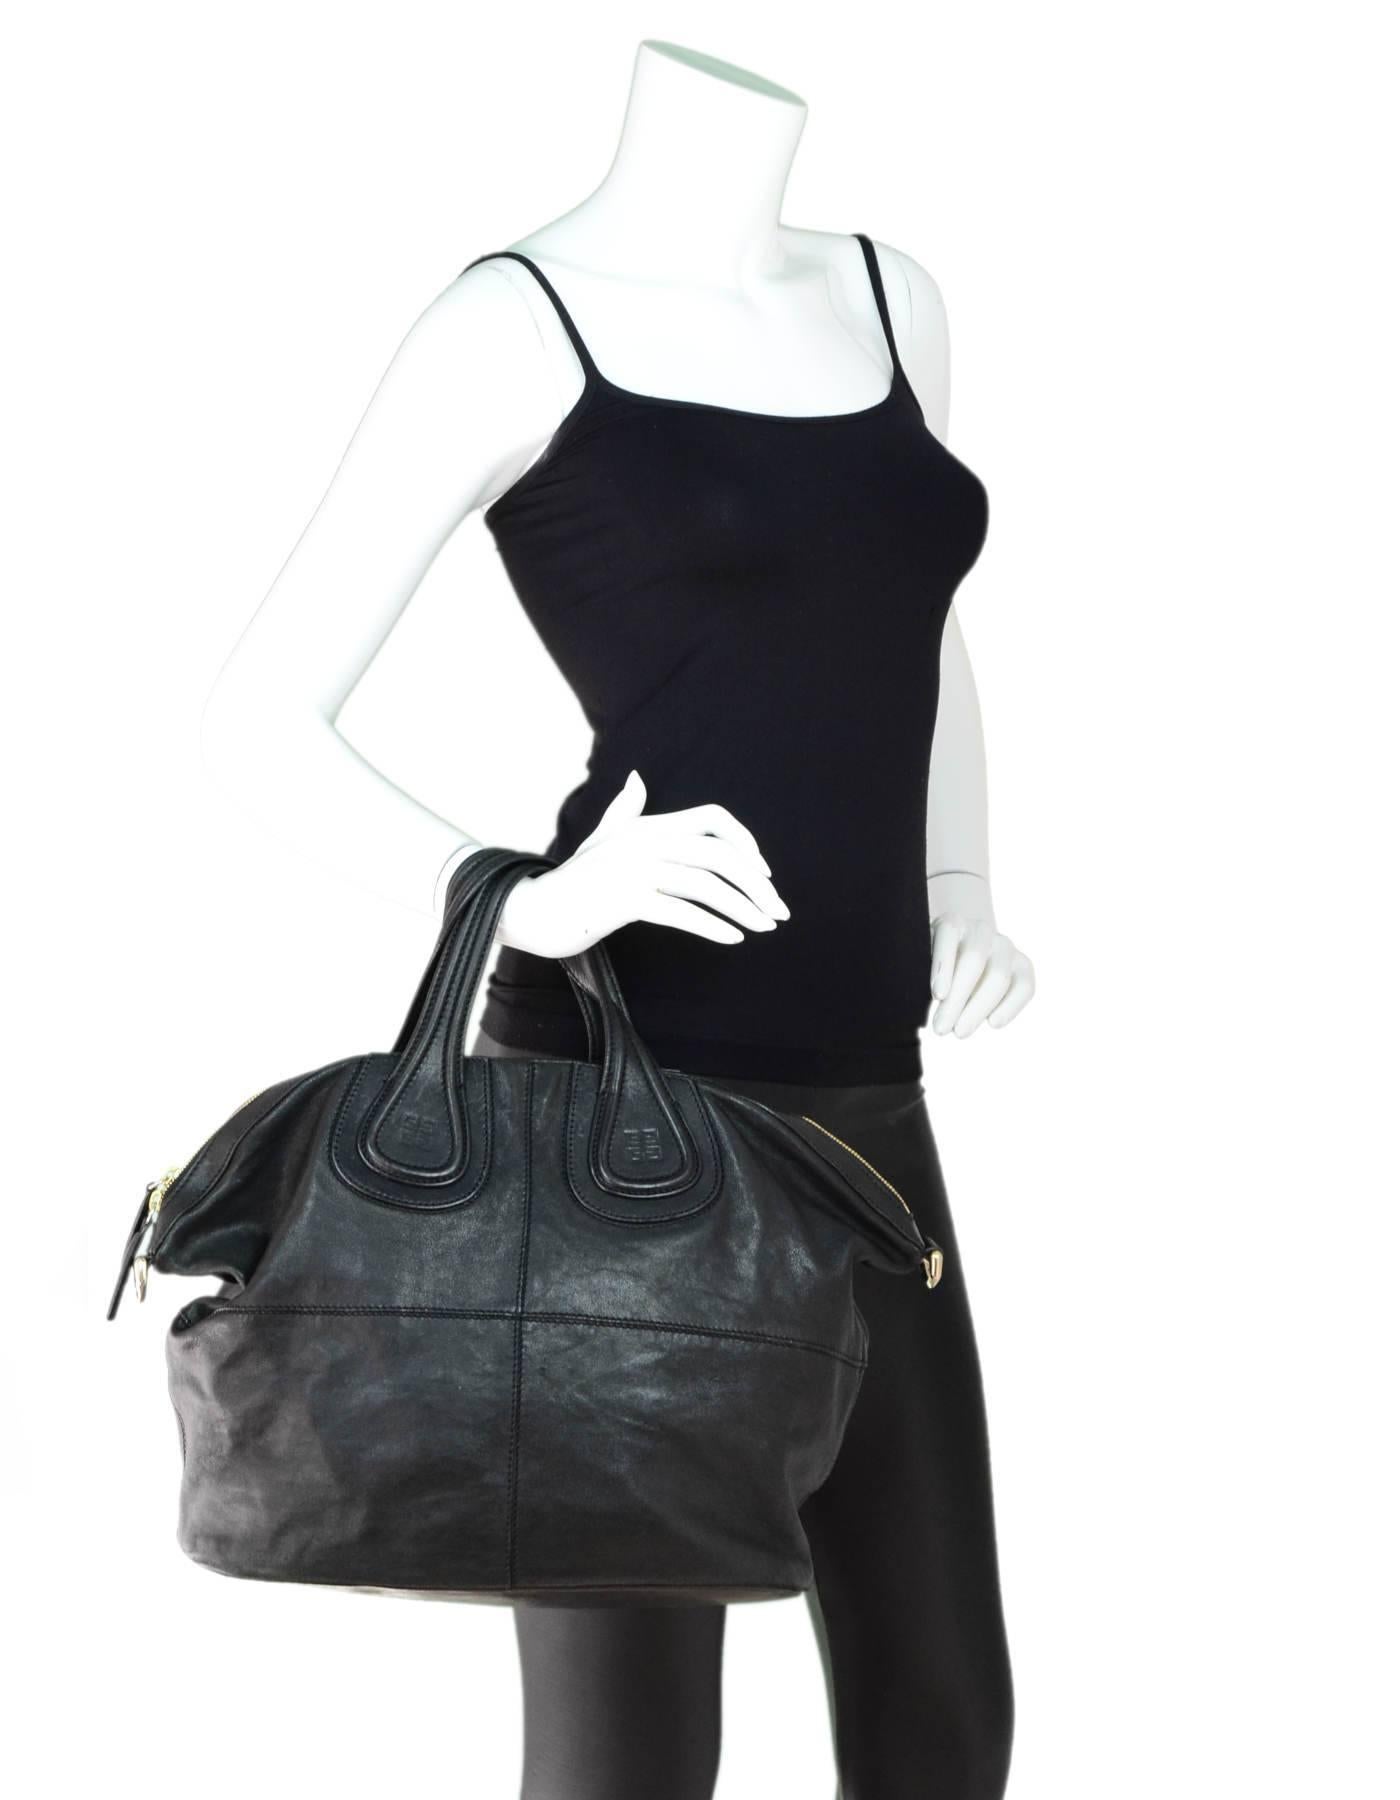 Givenchy Black Leather Medium Nightingale Tote
*Missing shoulder strap*

Made In: Italy
Color: Black
Hardware: Goldtone
Materials: Leather, metal
Lining: Black textile
Closure/Opening: Double zip top closure
Exterior Pockets: None
Interior Pockets: